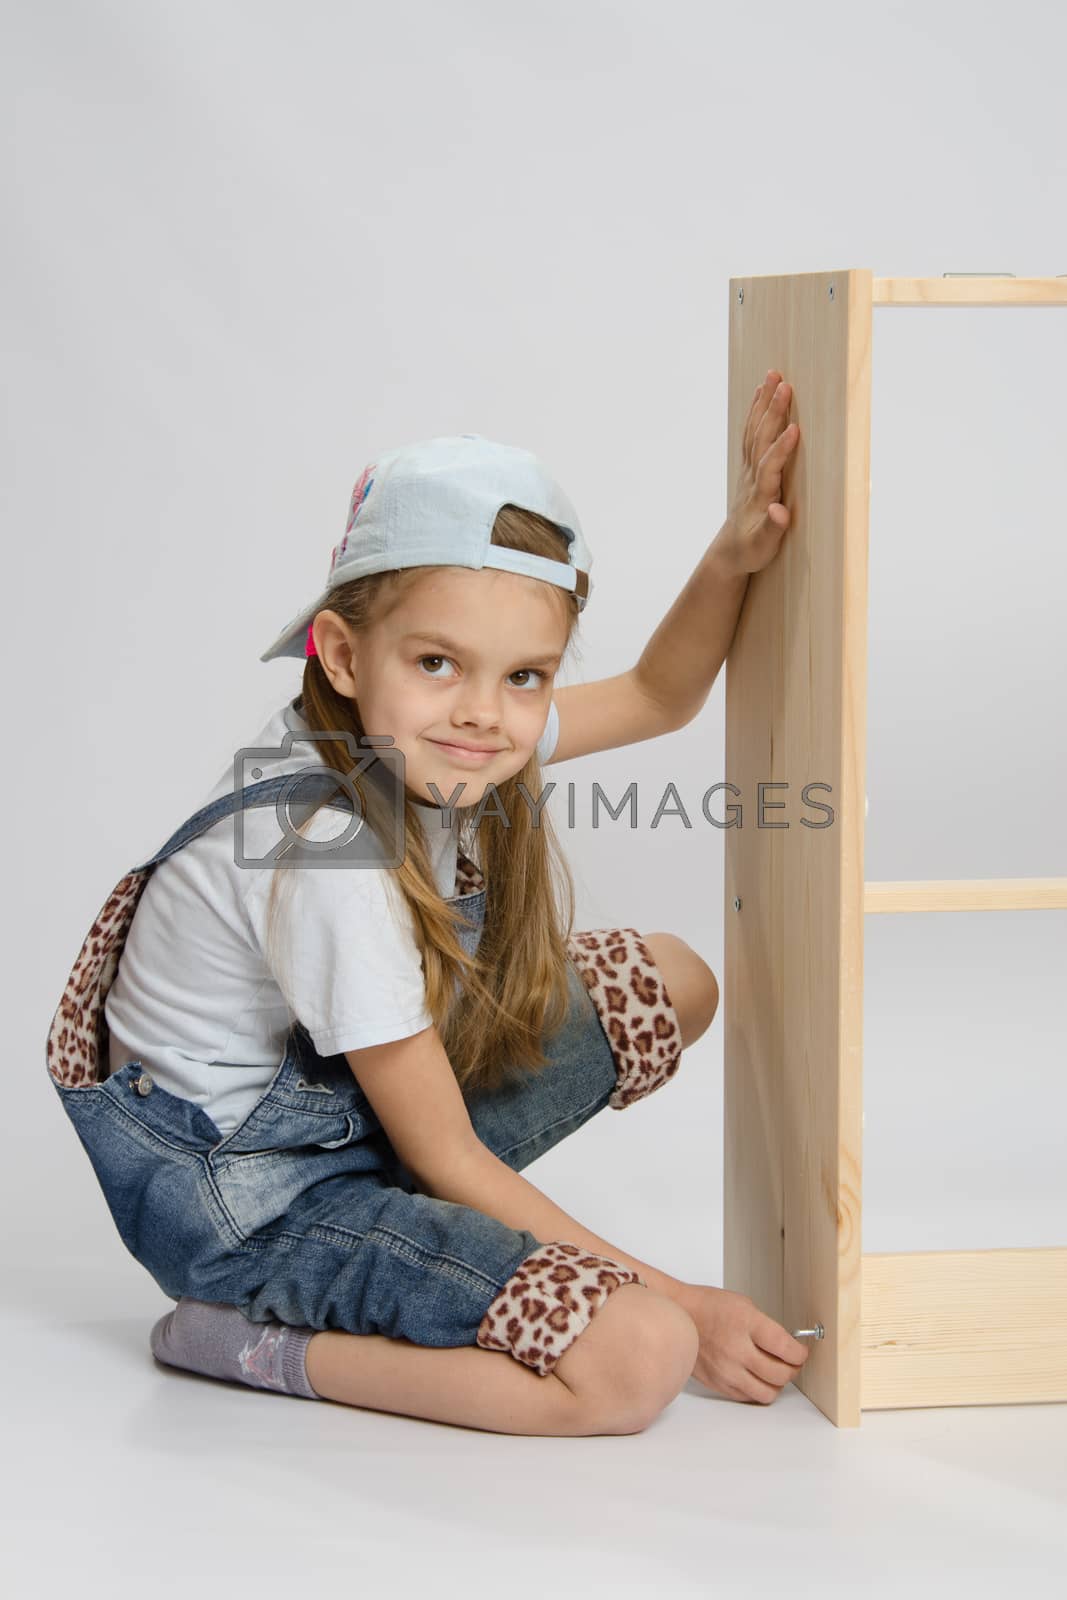 Royalty free image of Little girl in overalls collector of furniture turn screw on dresser by Madhourse